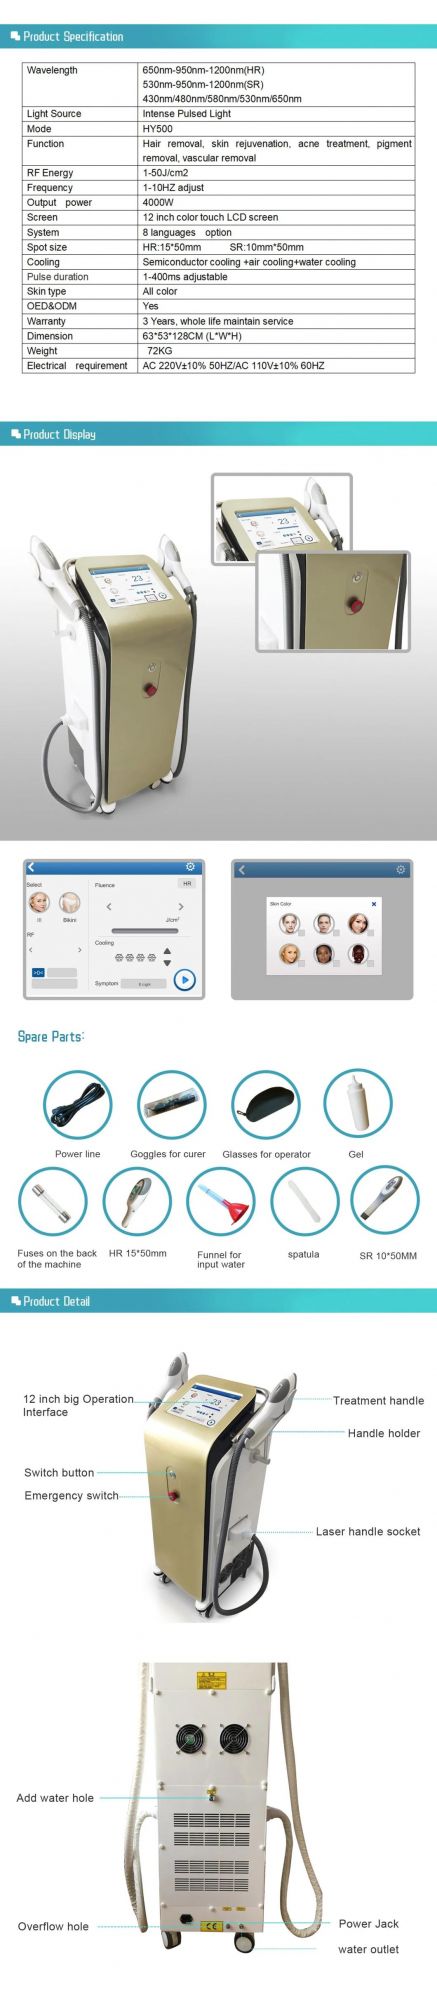 Beauty Salon Equipment for Hair Removal and Skin Rejuvenation